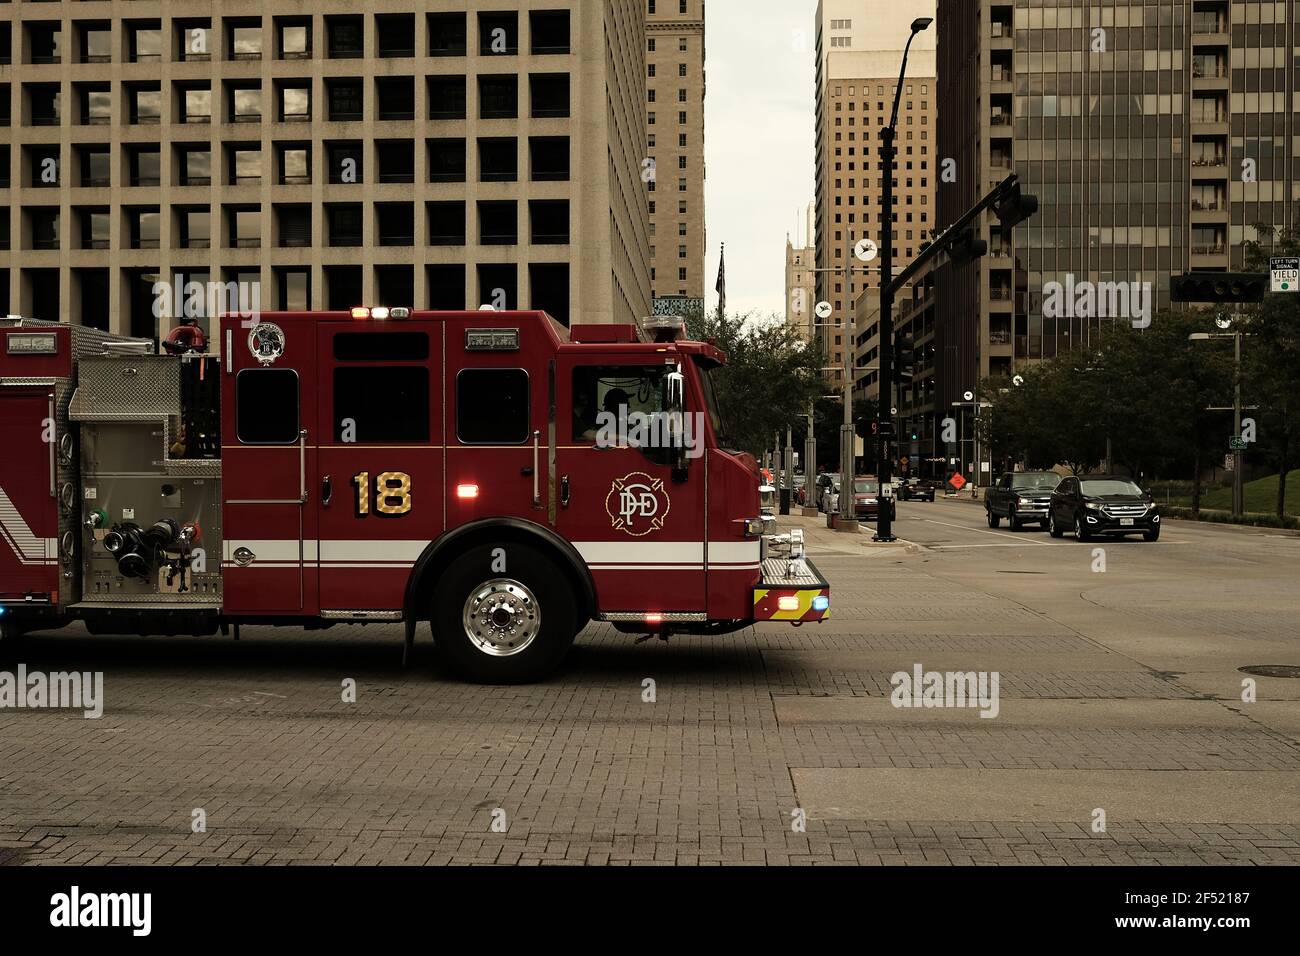 Dallas, TX, USA - 09 05 2020: Fire Truck driving into an intersection in downtown Dallas Stock Photo